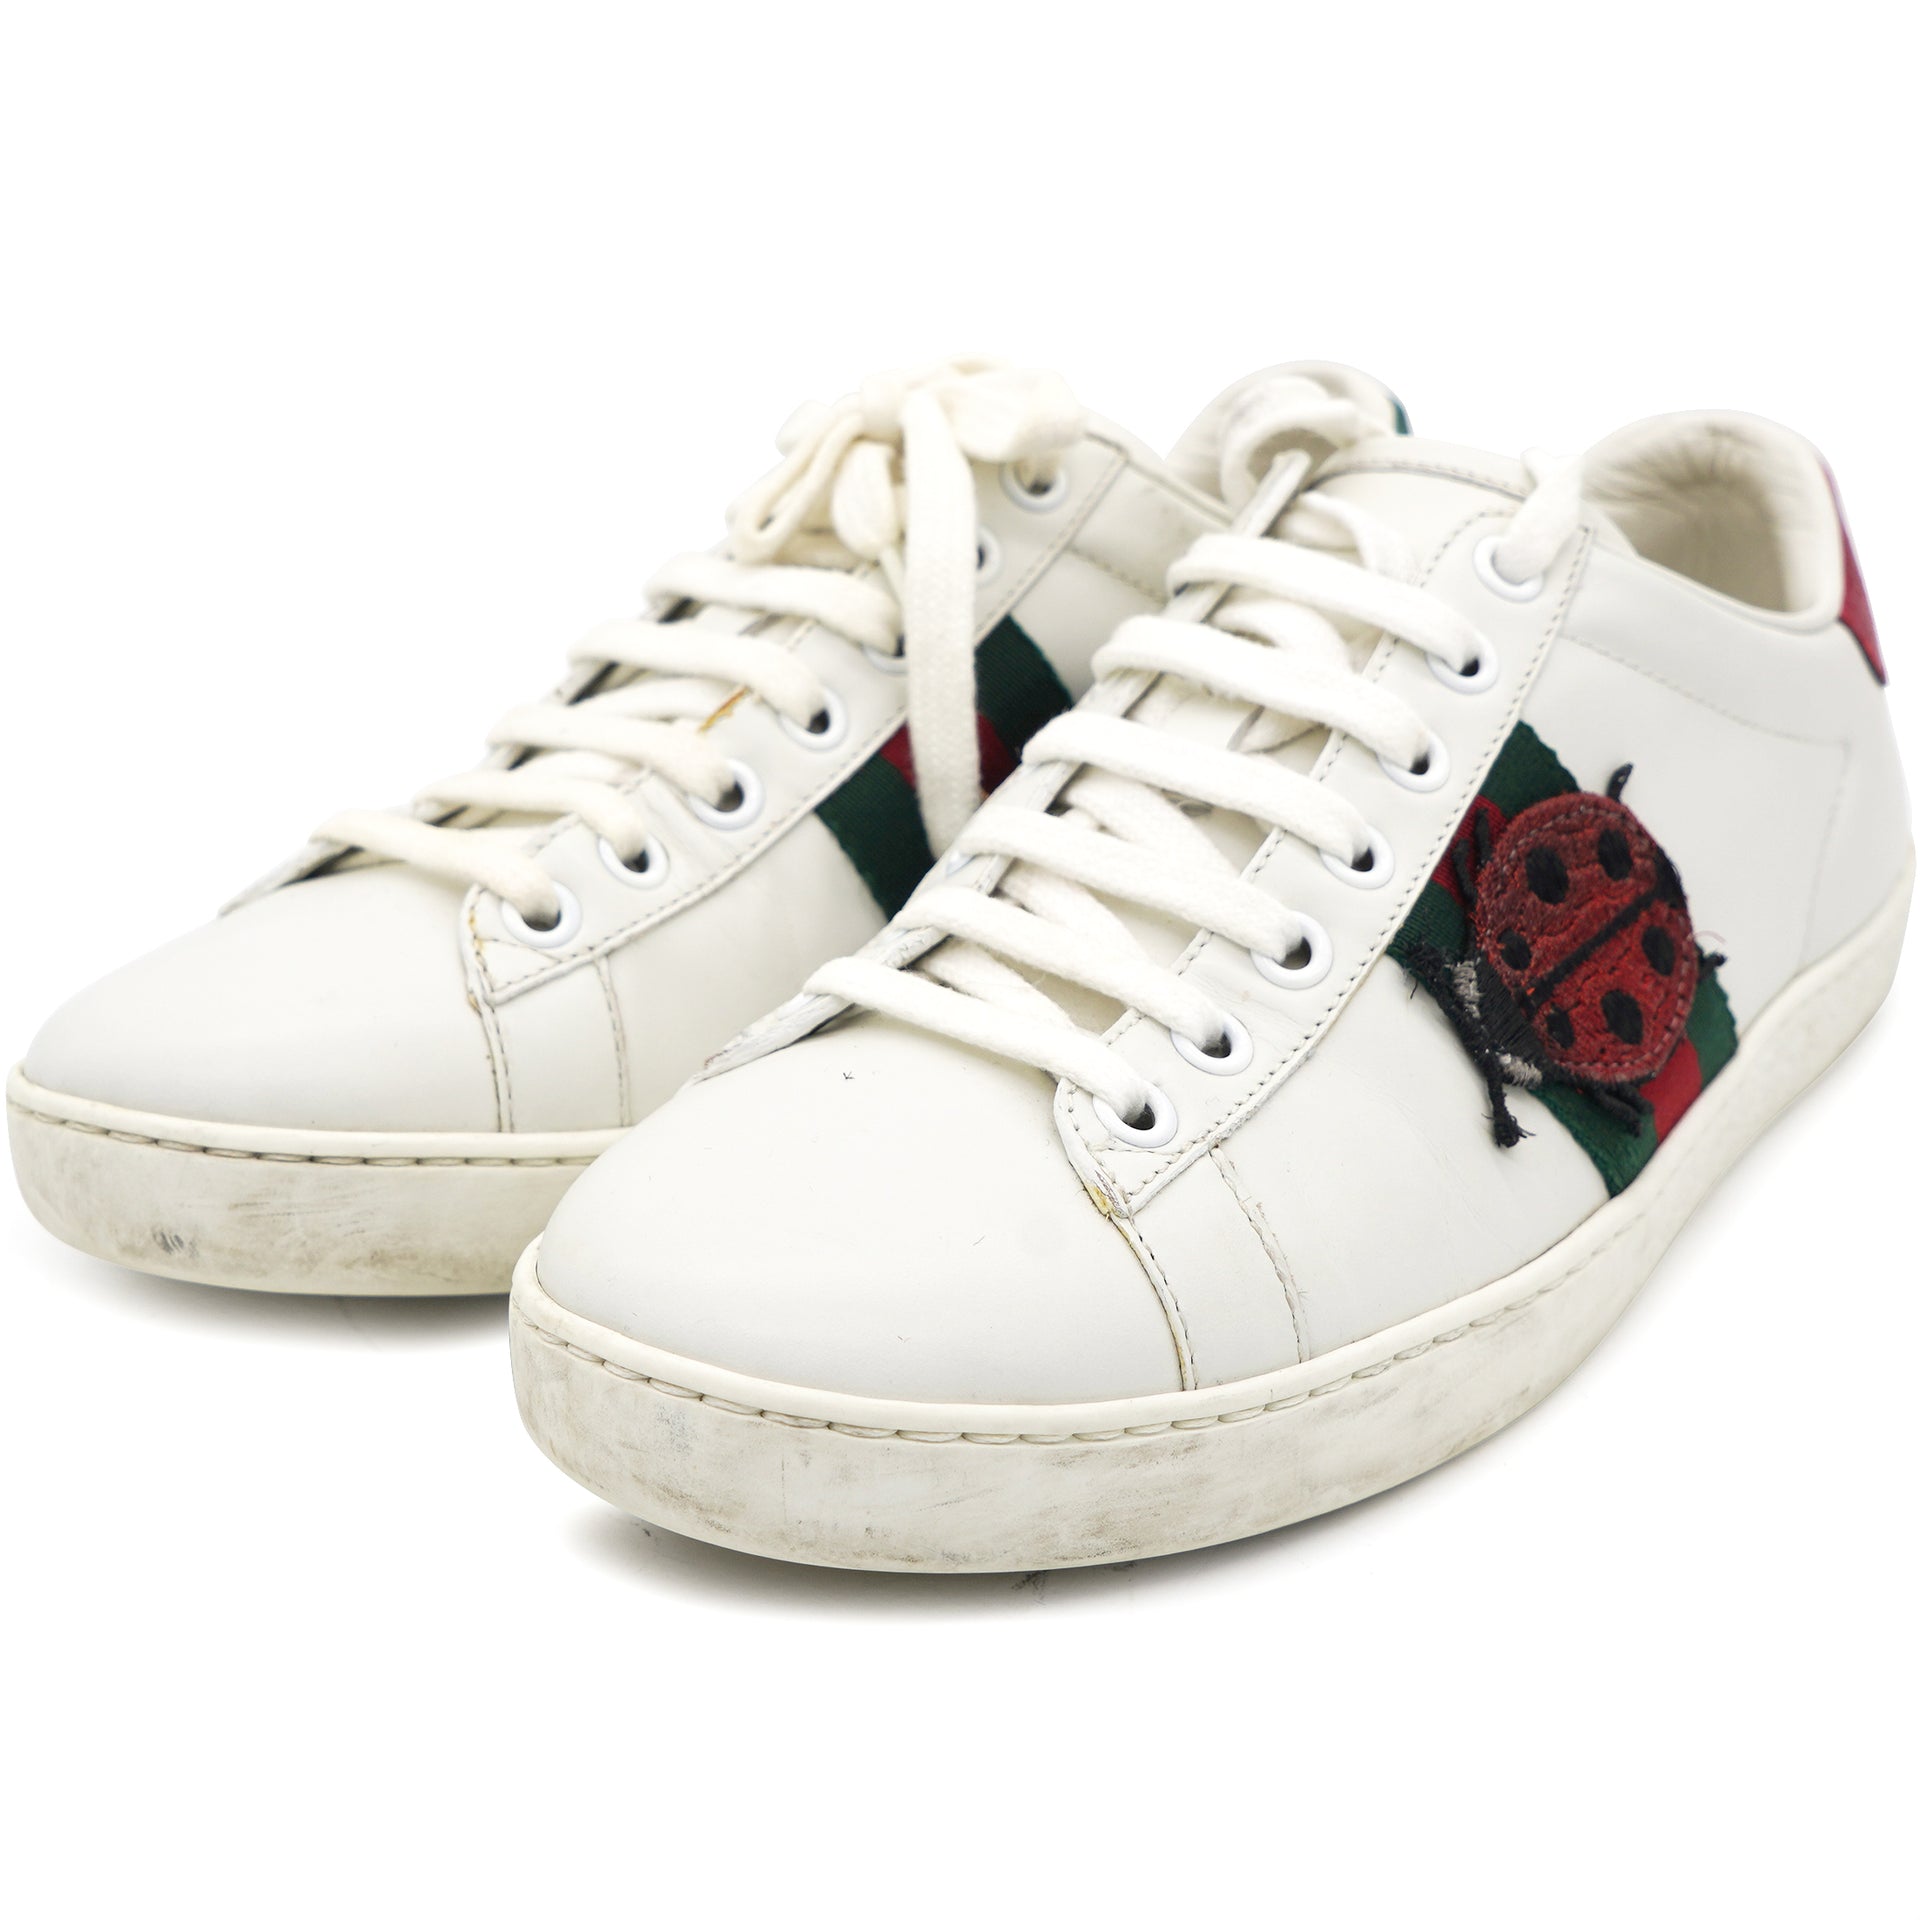 White 'Ace' Sneakers 36